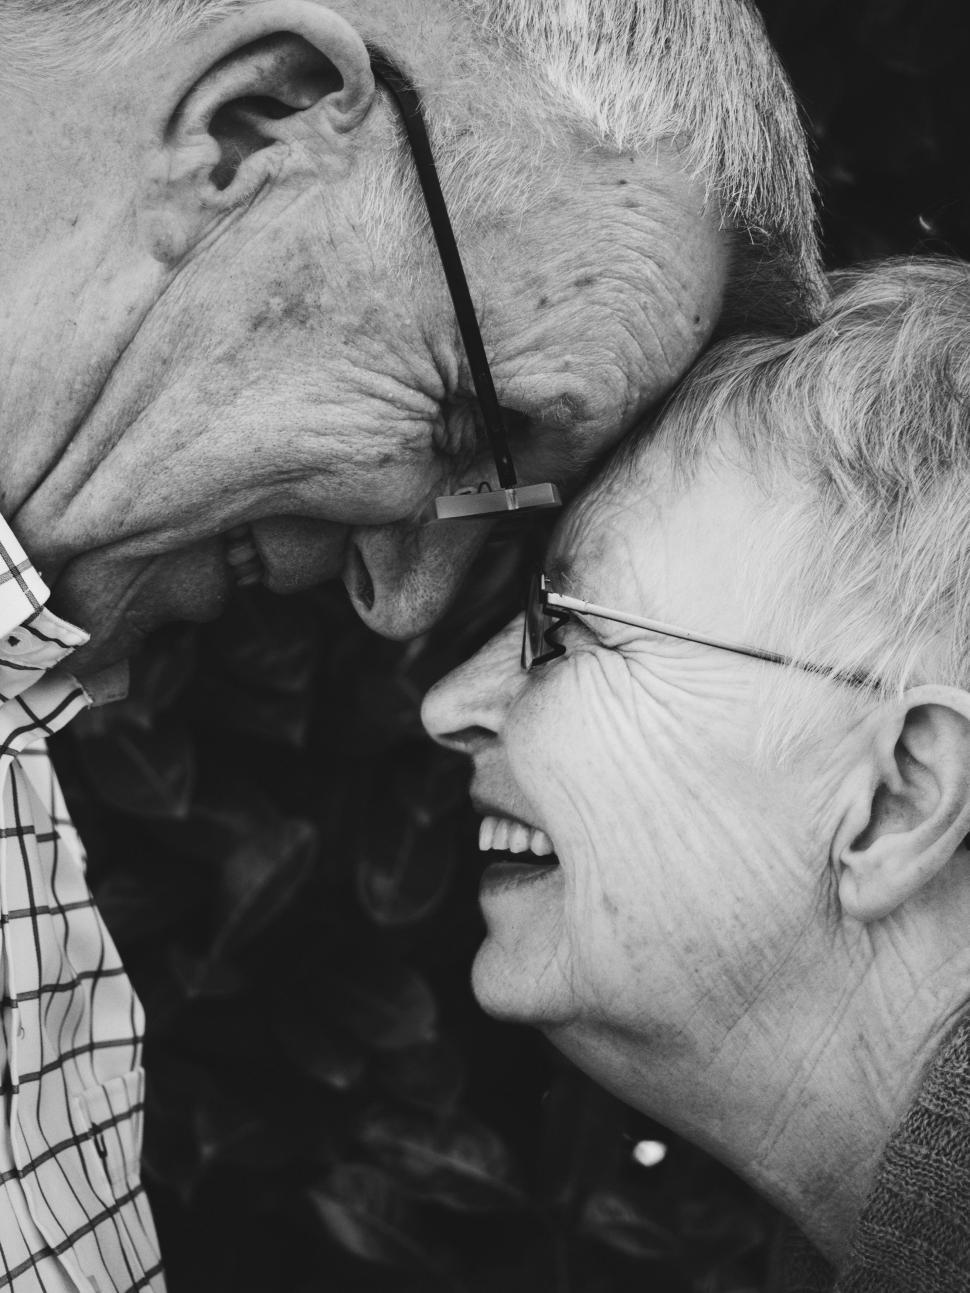 Free Image of Man and Woman Smiling at Each Other 